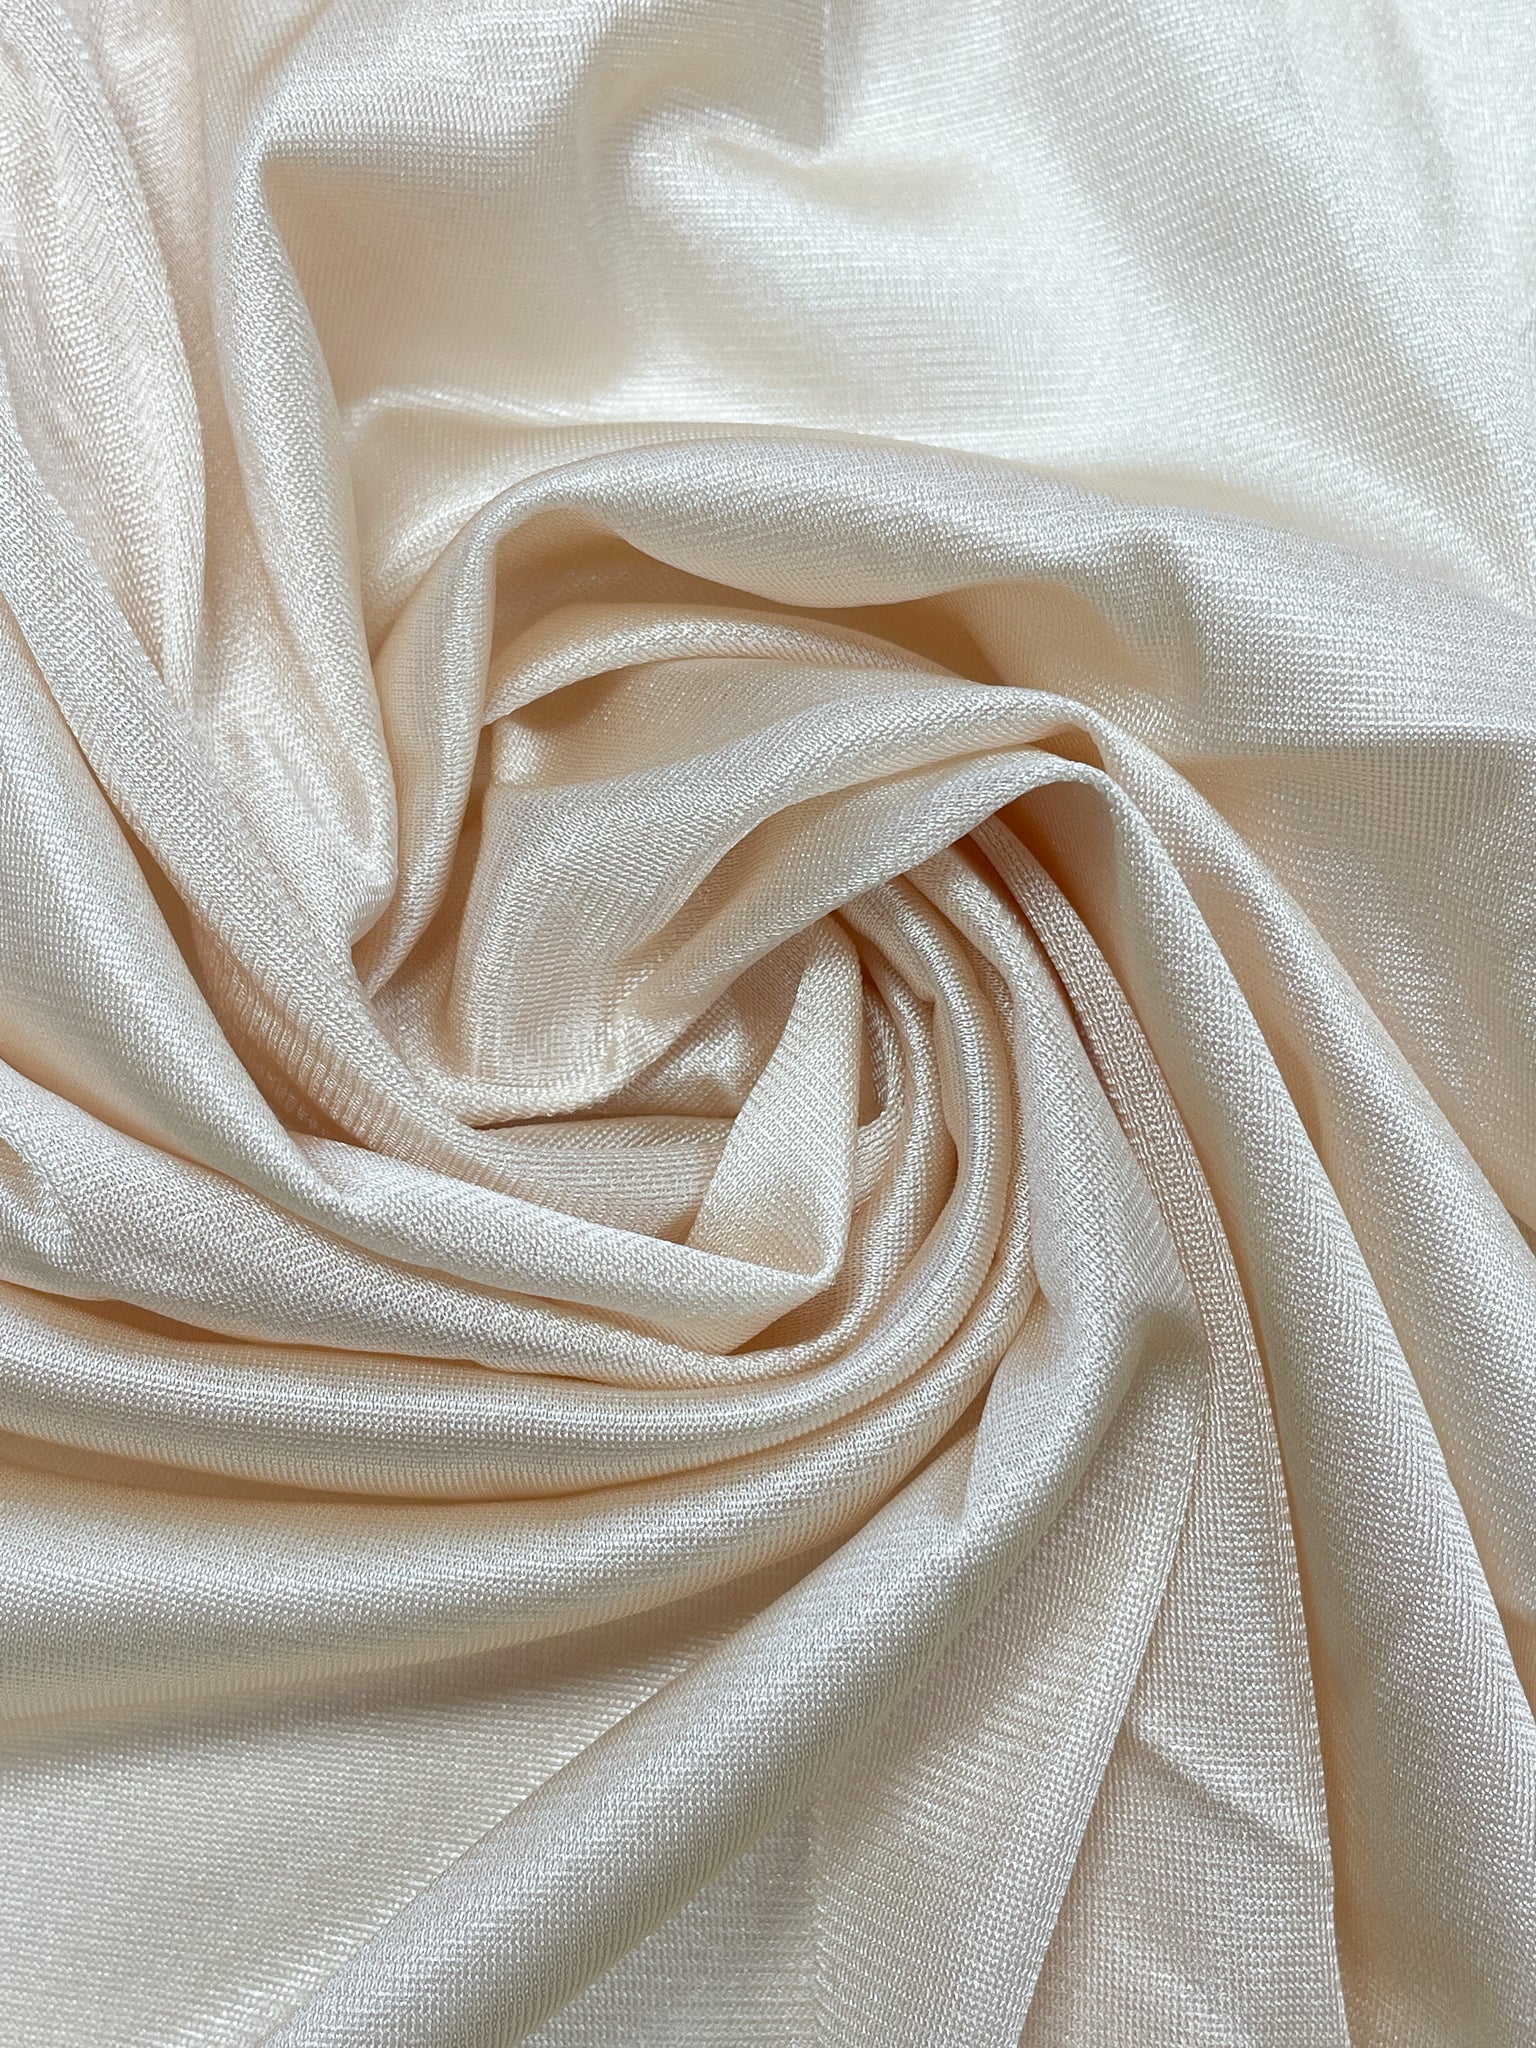 3 YD Nylon Tricot EXTRA WIDE - Light Beige